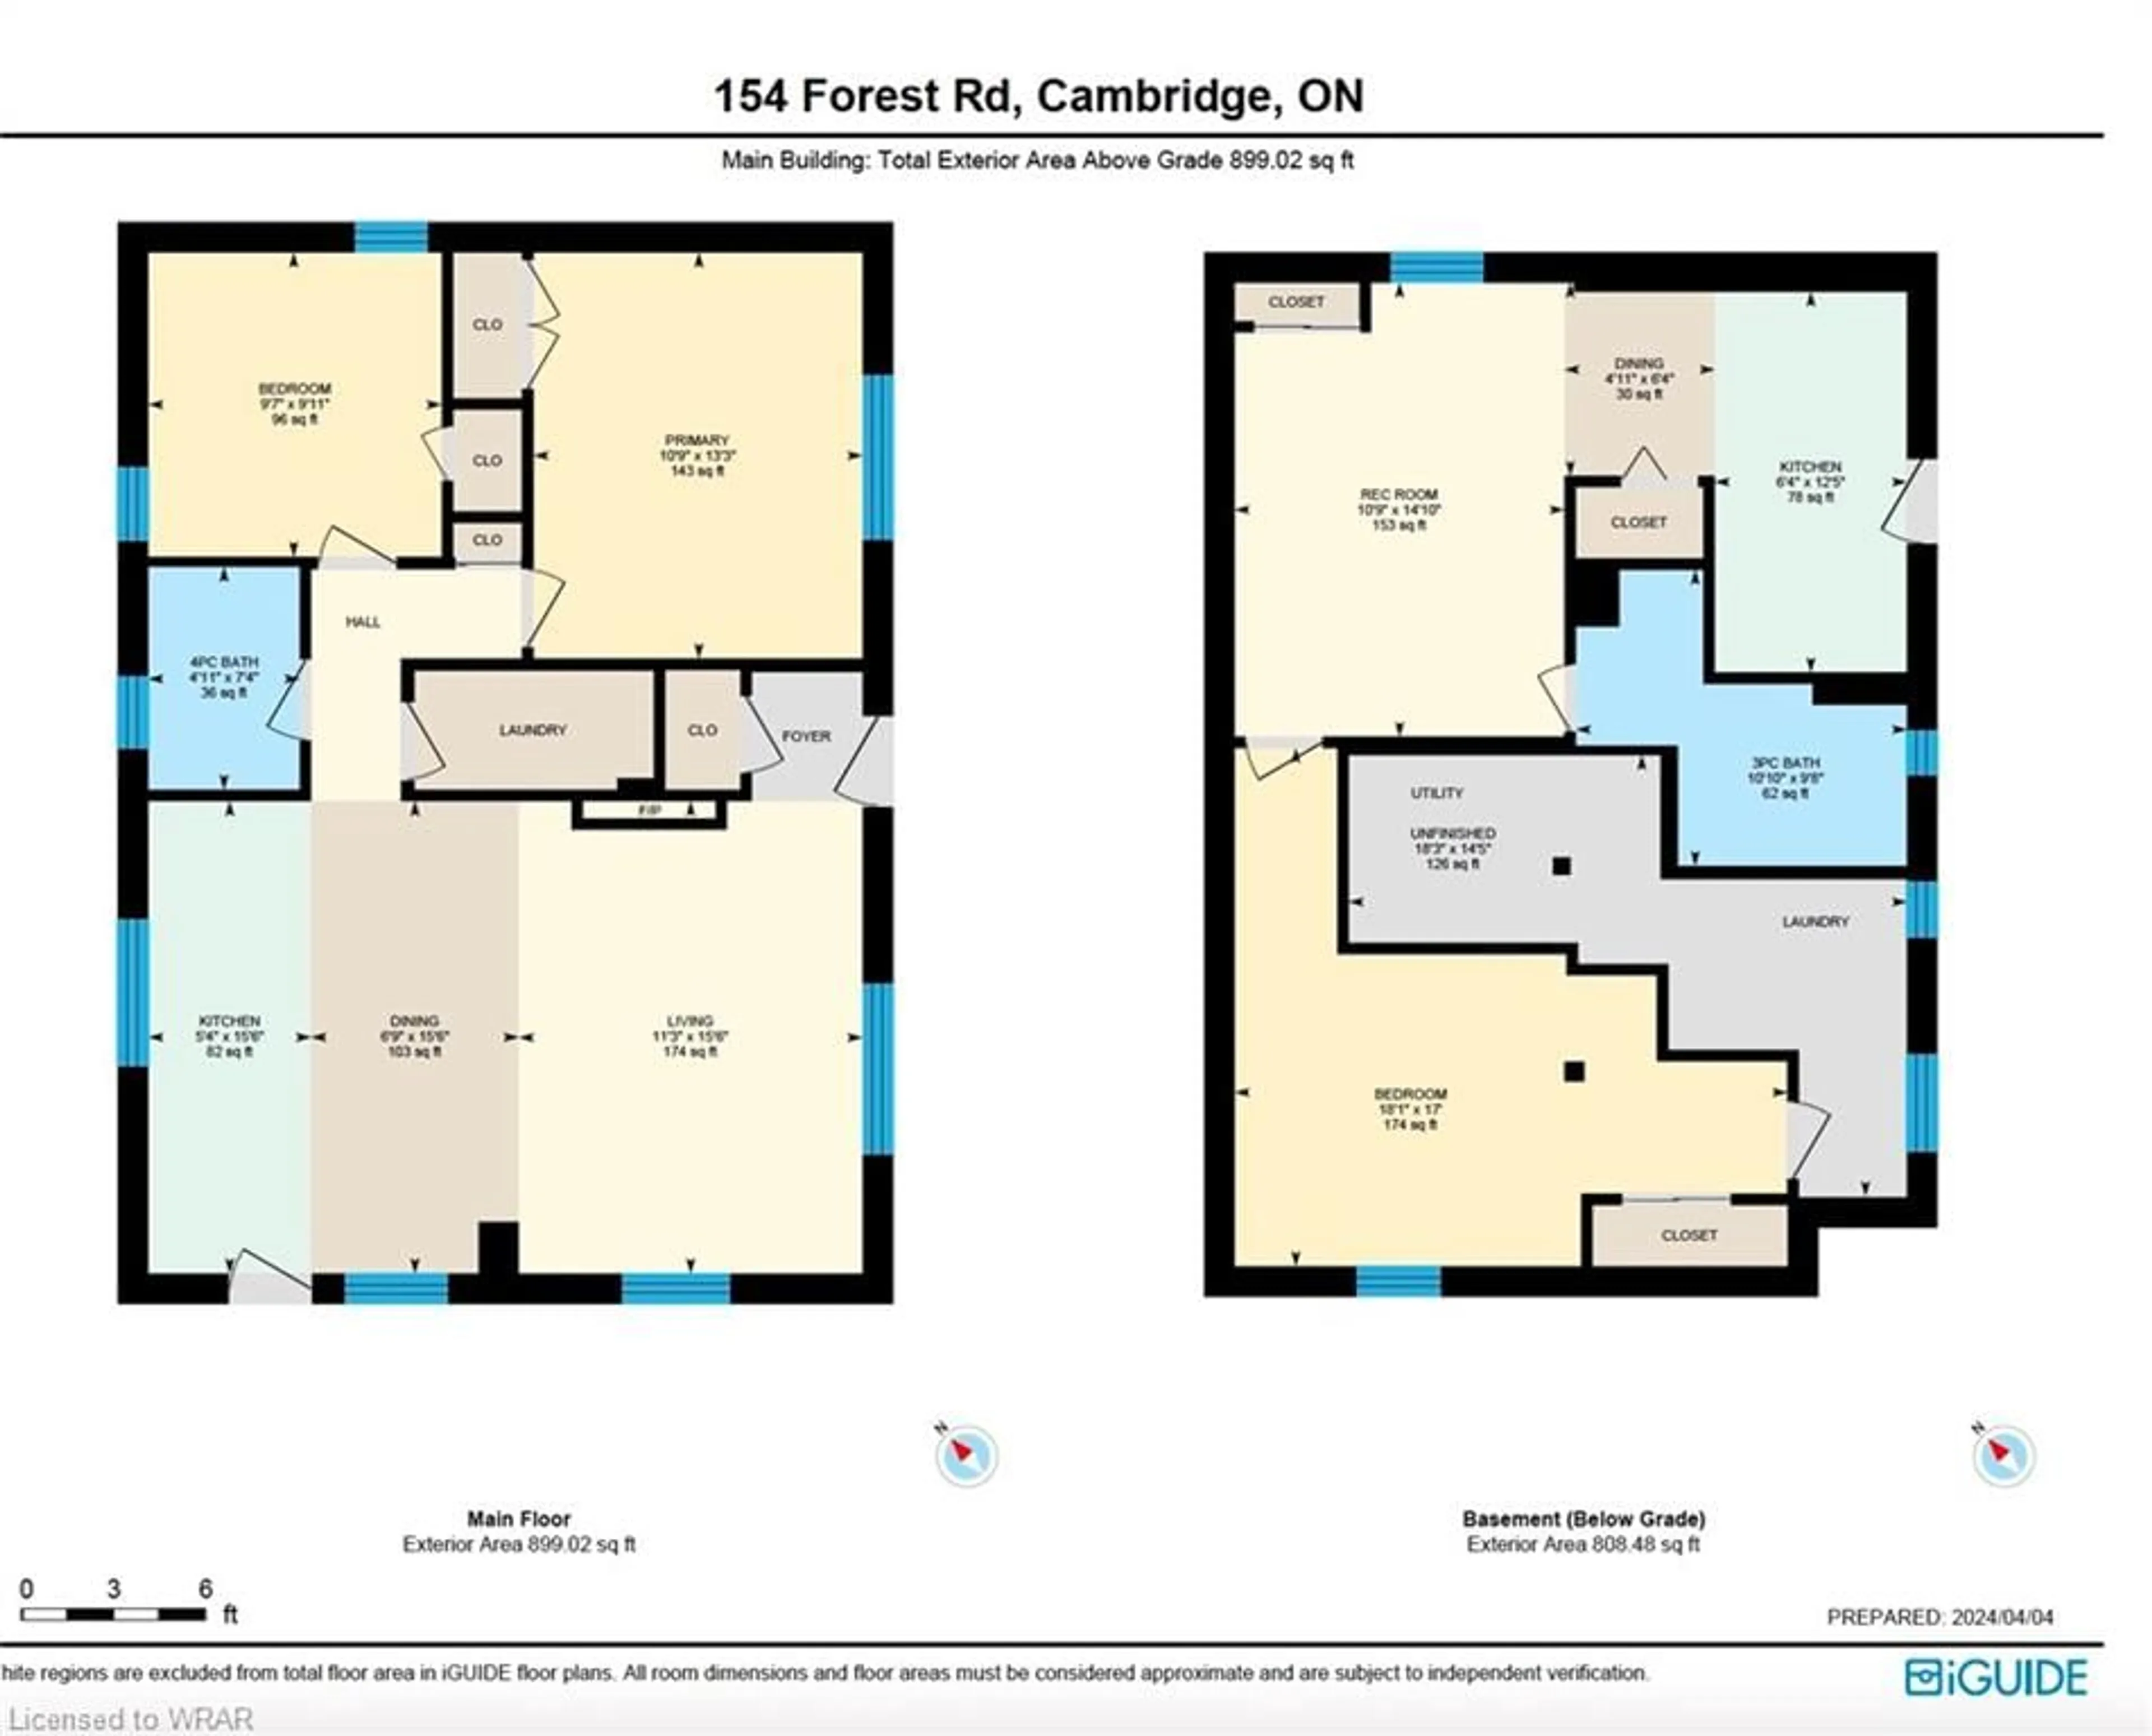 Floor plan for 154 Forest Rd, Cambridge Ontario N1S 3B8